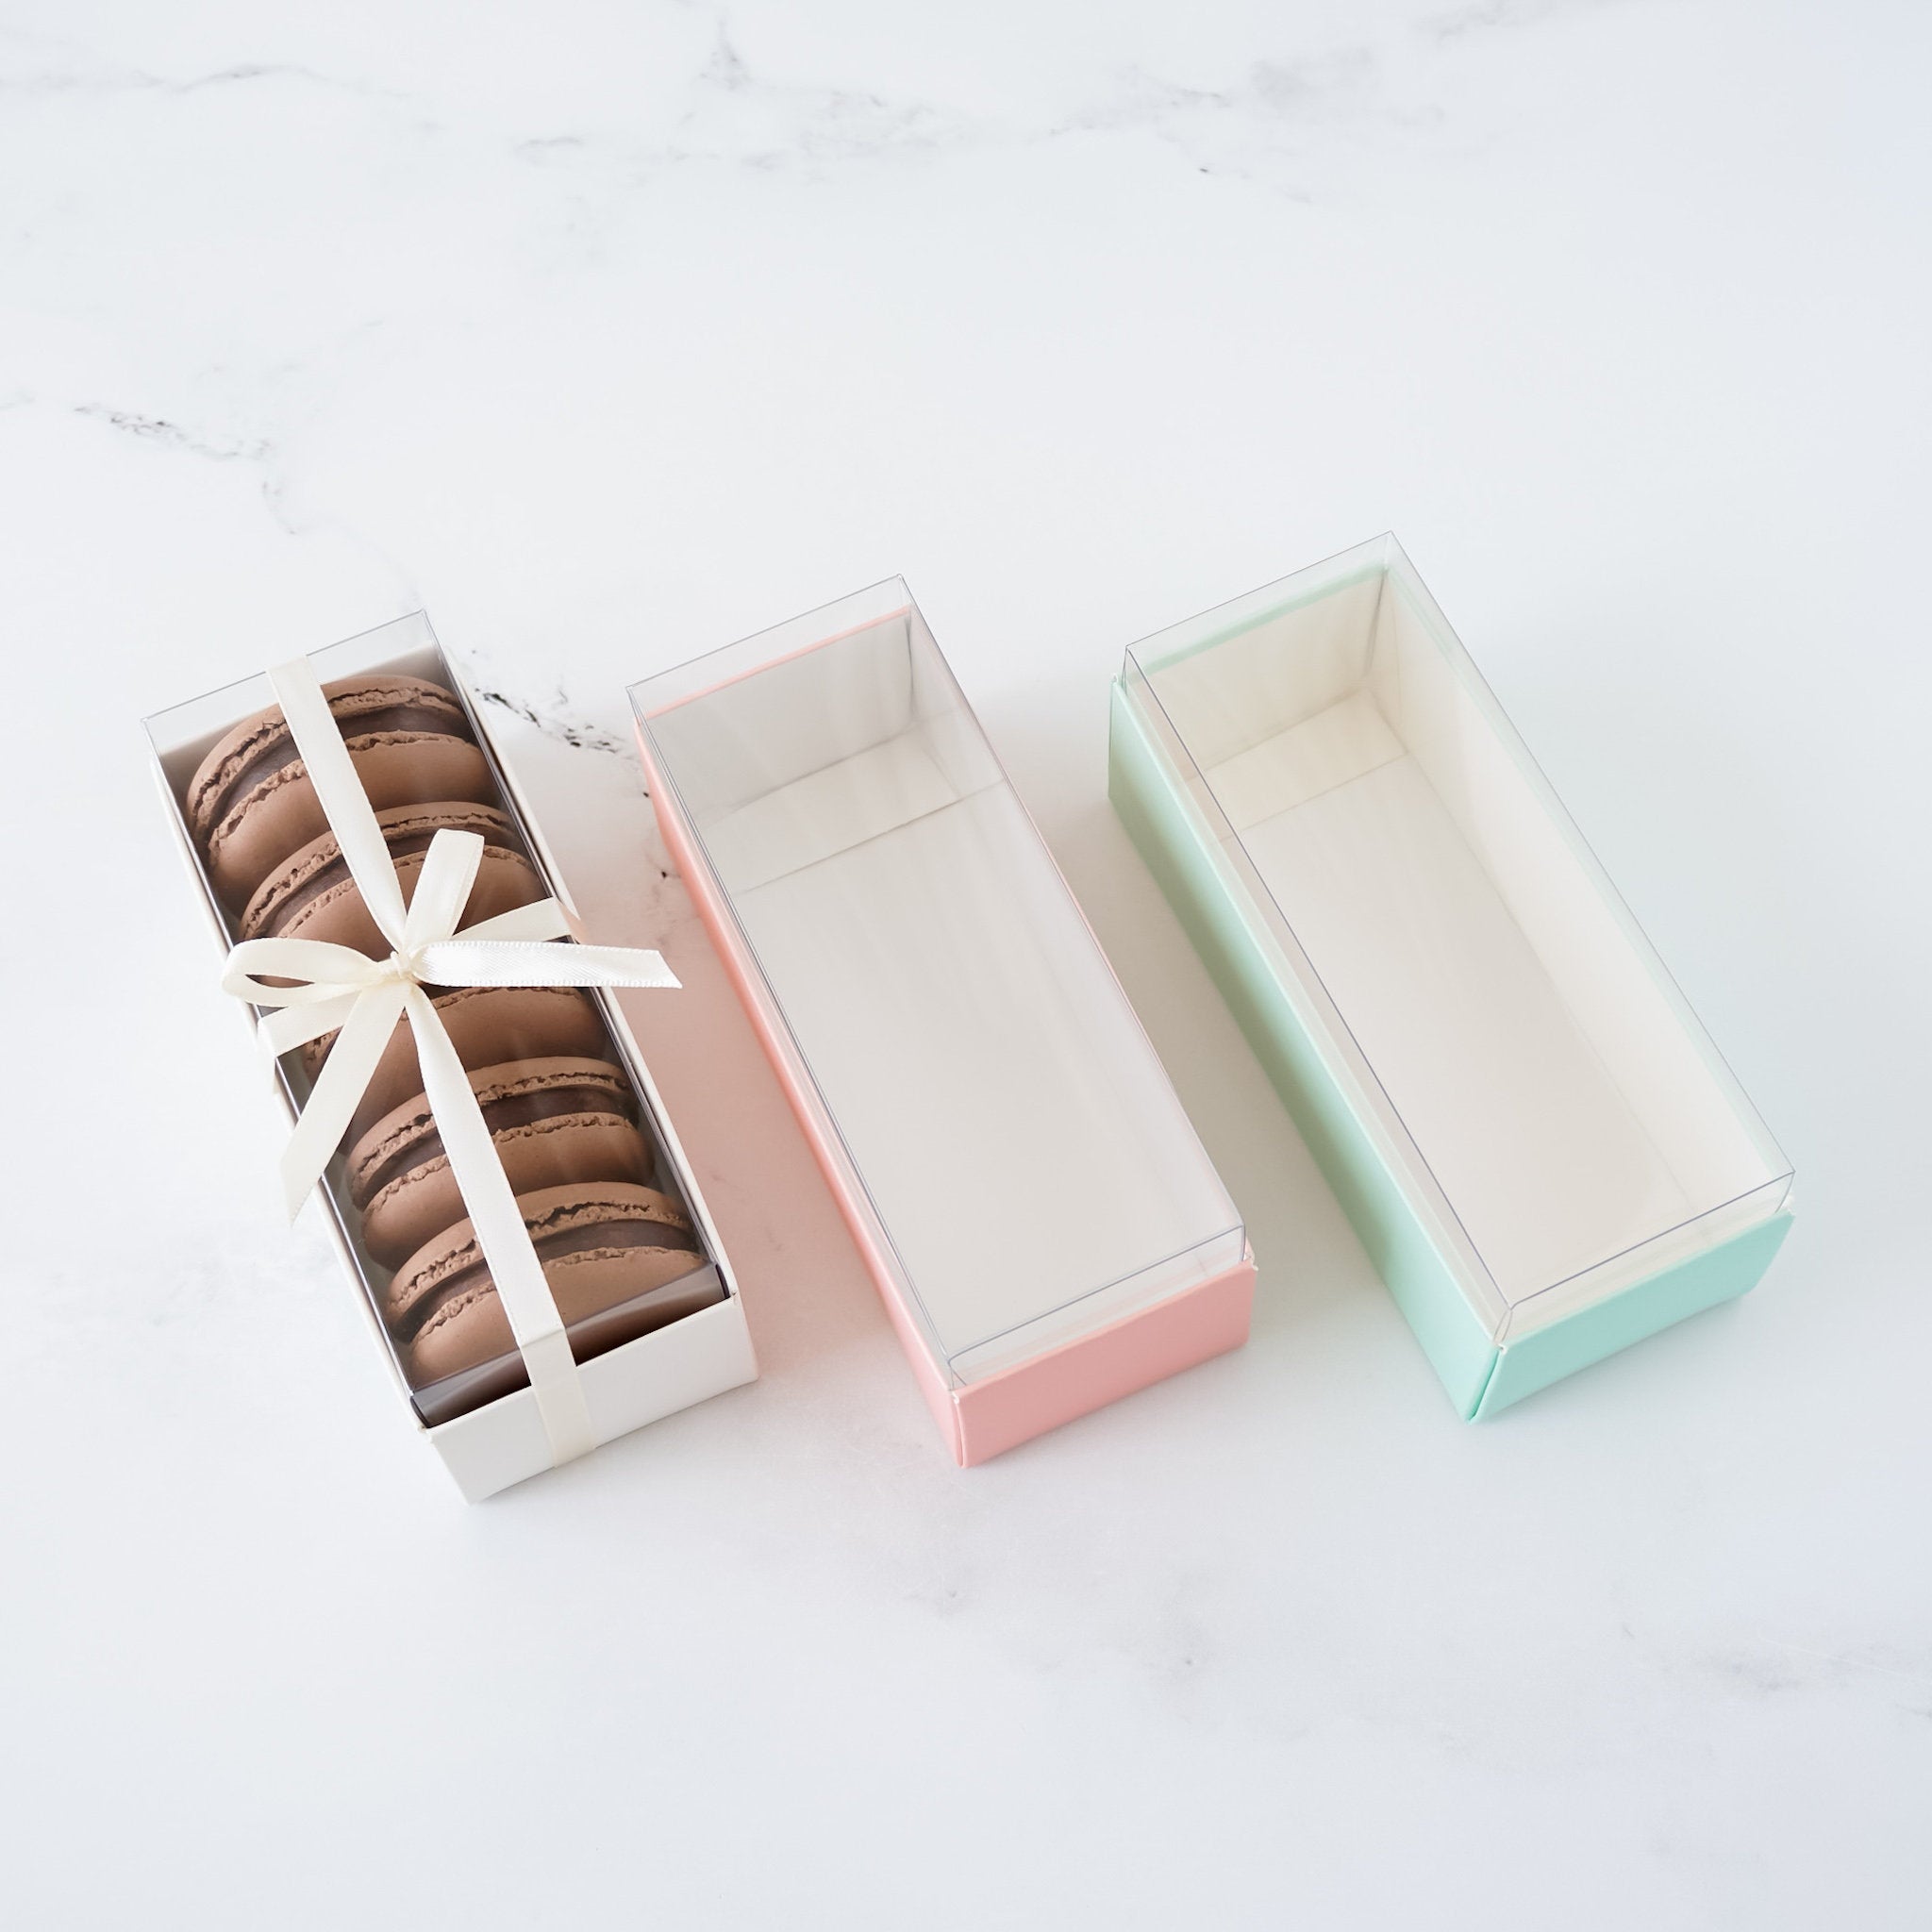 mini macaron boxes in white, pink, and mint